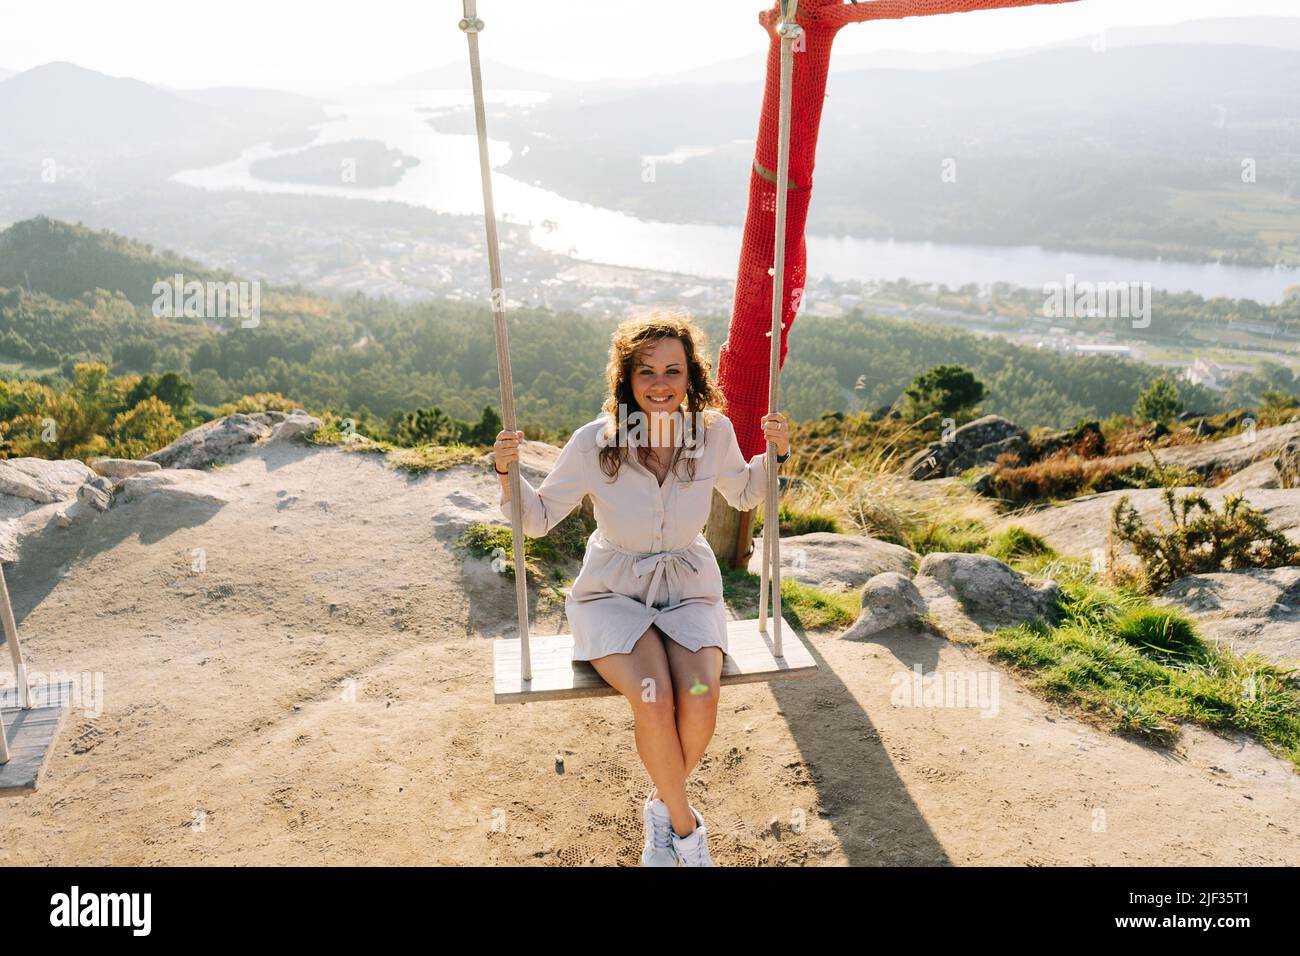 Young woman on a swing against a beautiful landscape in Galicia, Spain Stock Photo